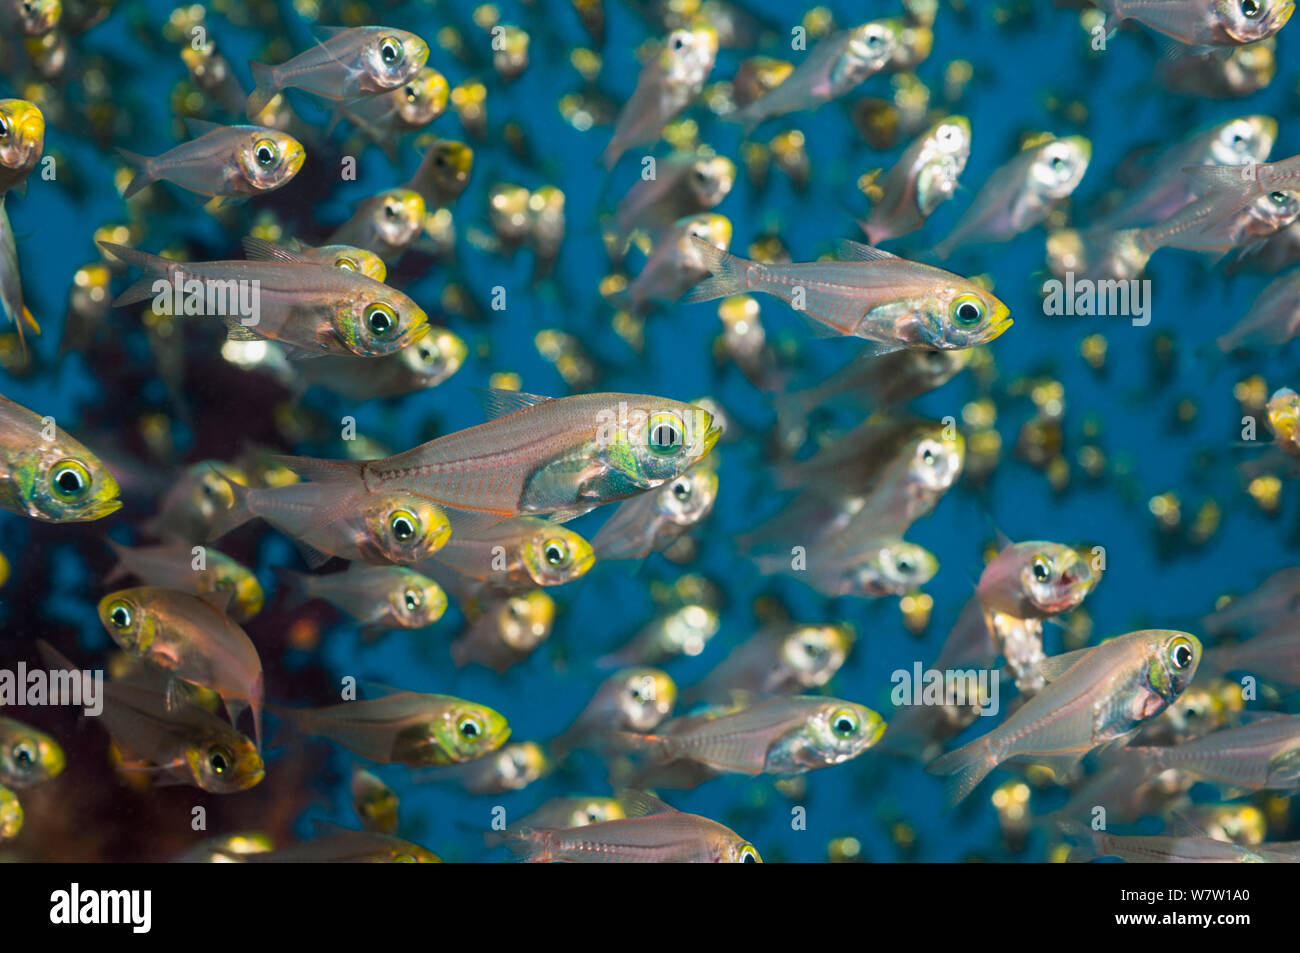 Pygmy sweepers (Parapriacanthus ransonneti)  Egypt, Red Sea. Stock Photo